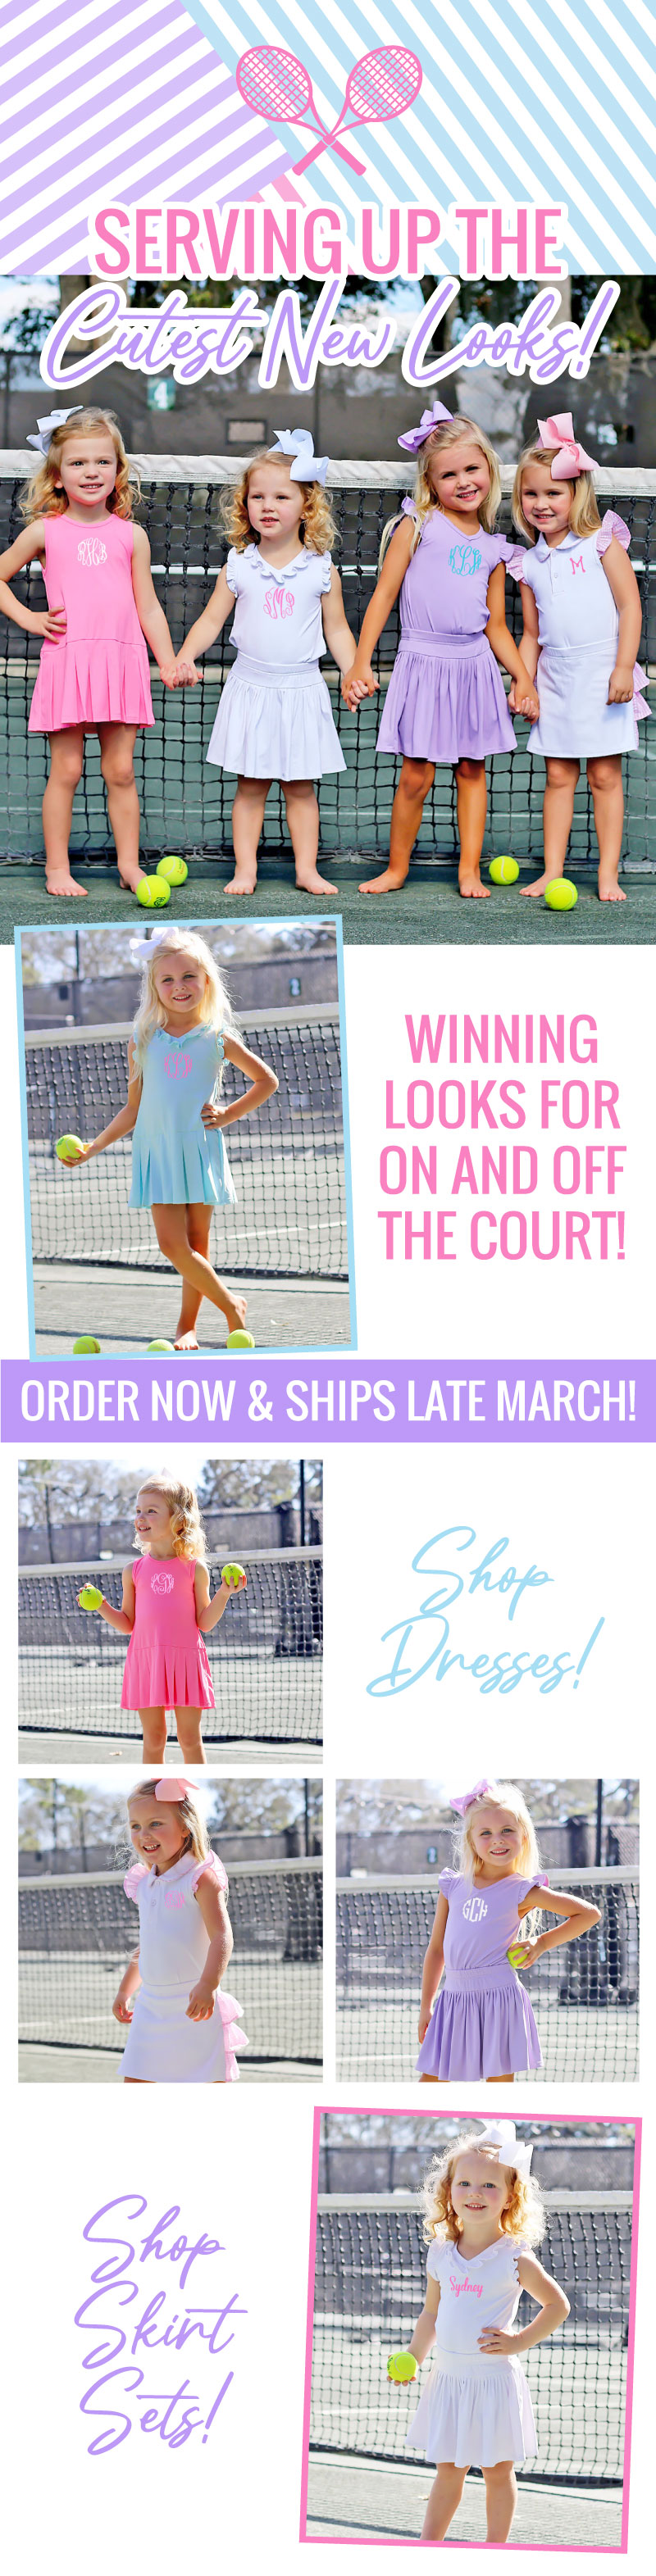 Serving up the cutest new looks! Winning looks for on and off the court! Shop tennis dresses and skirt sets!